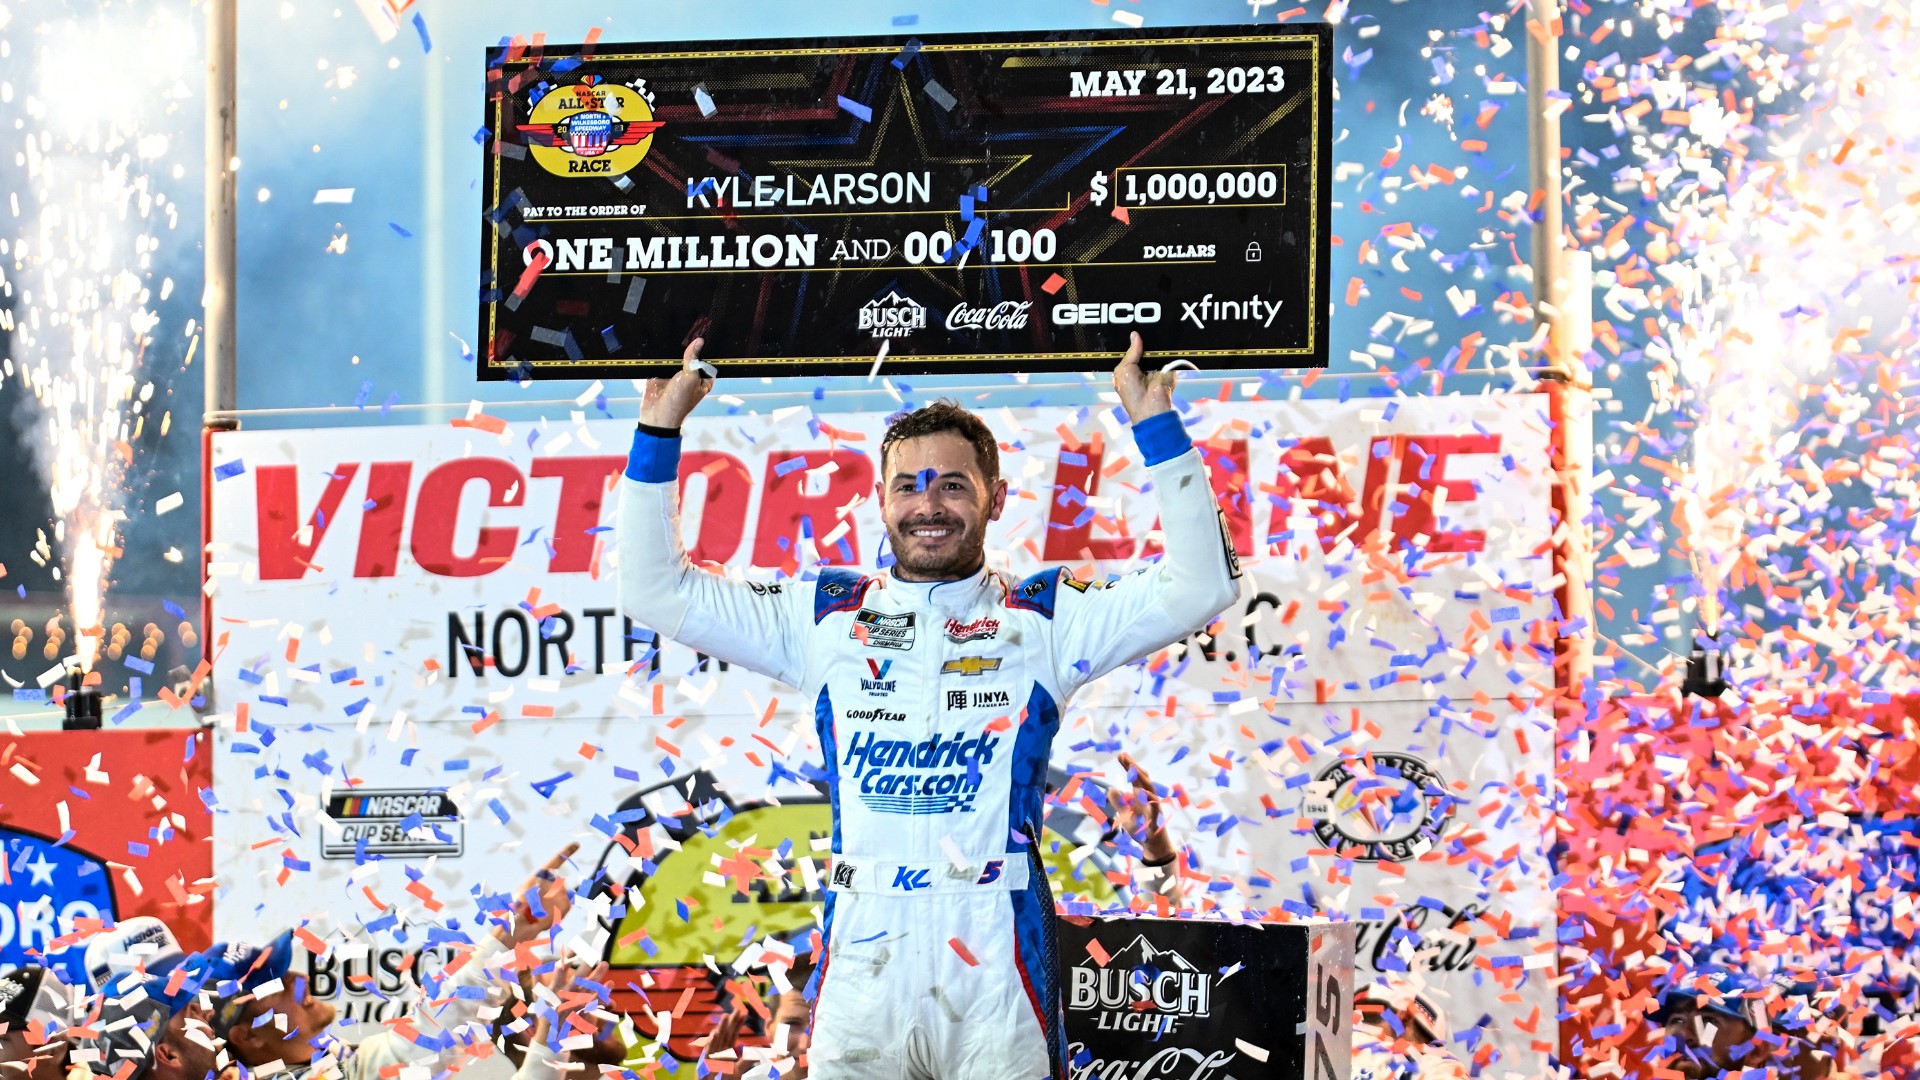 Larson dominated Sunday's all-star race in the first NASCAR Cup Series race at North Wilkesboro Speedway since 1996.